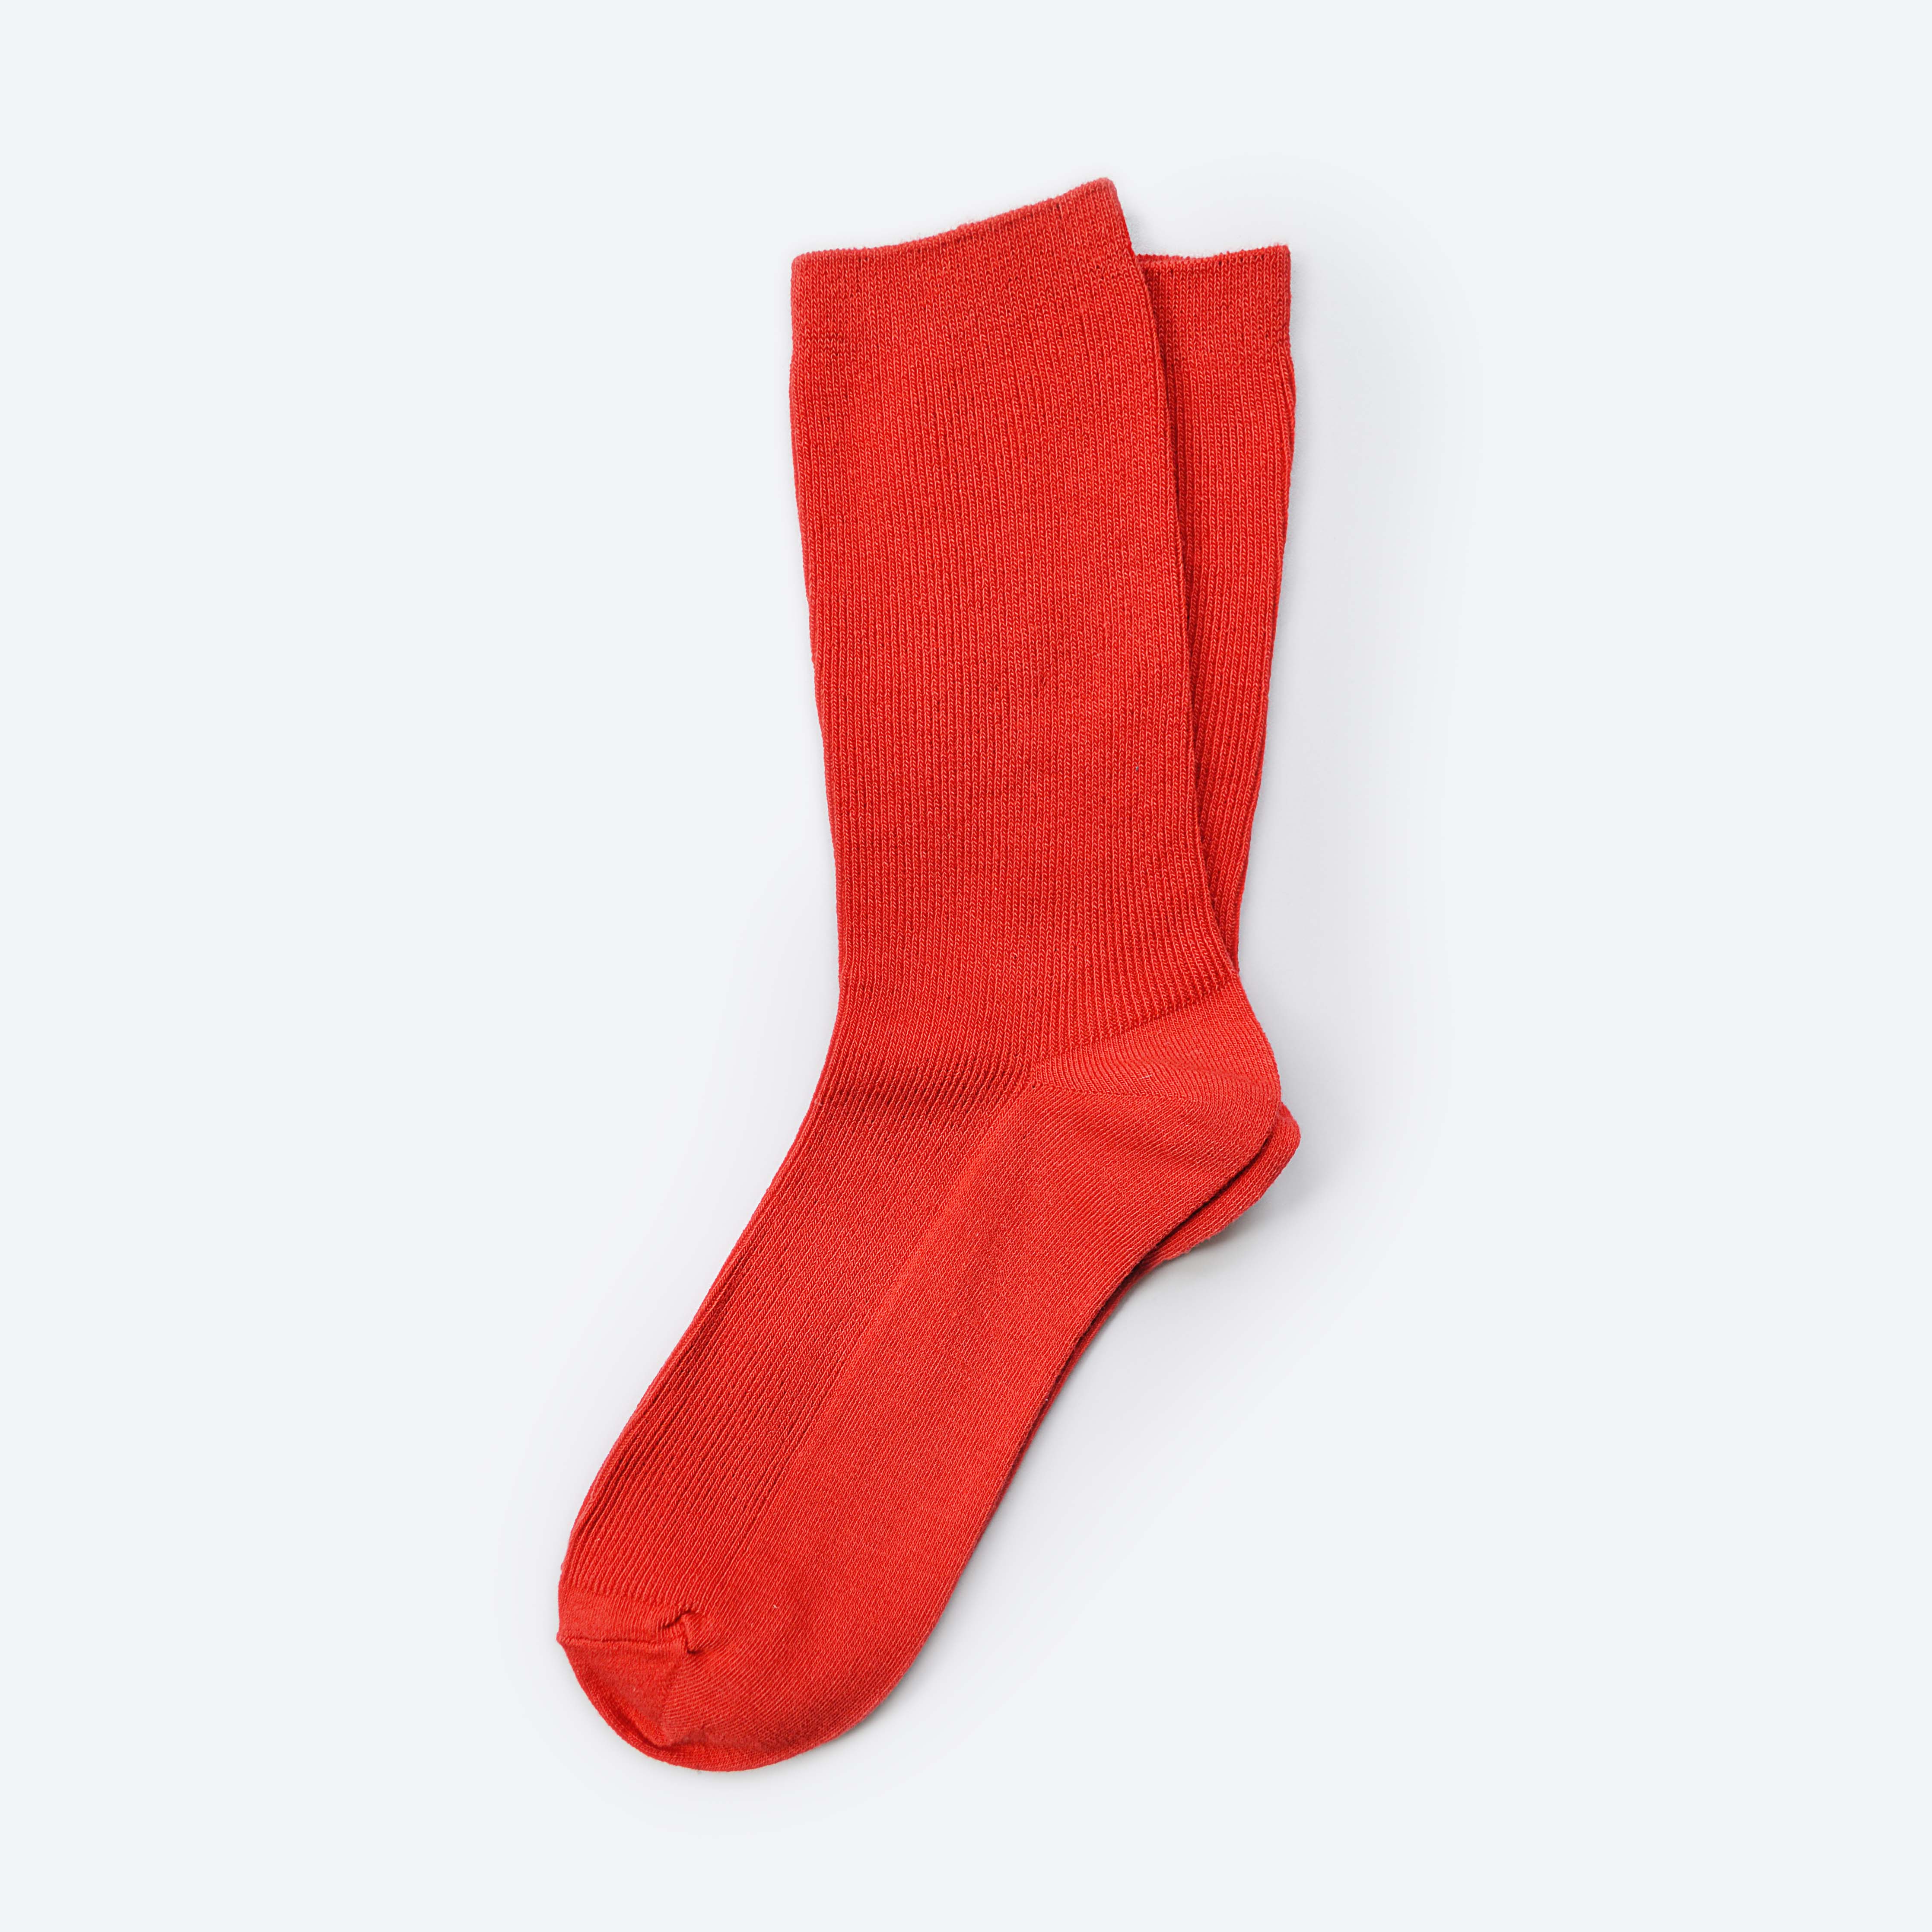 Hooray Sock Co.&#39;s Scarlet Crew Socks: Comfort and poppin&#39; colors in Everyday Cotton. Shorter crew length. 80% cotton, 20% spandex. Made in South Korea. Small (Women&#39;s 4-10).